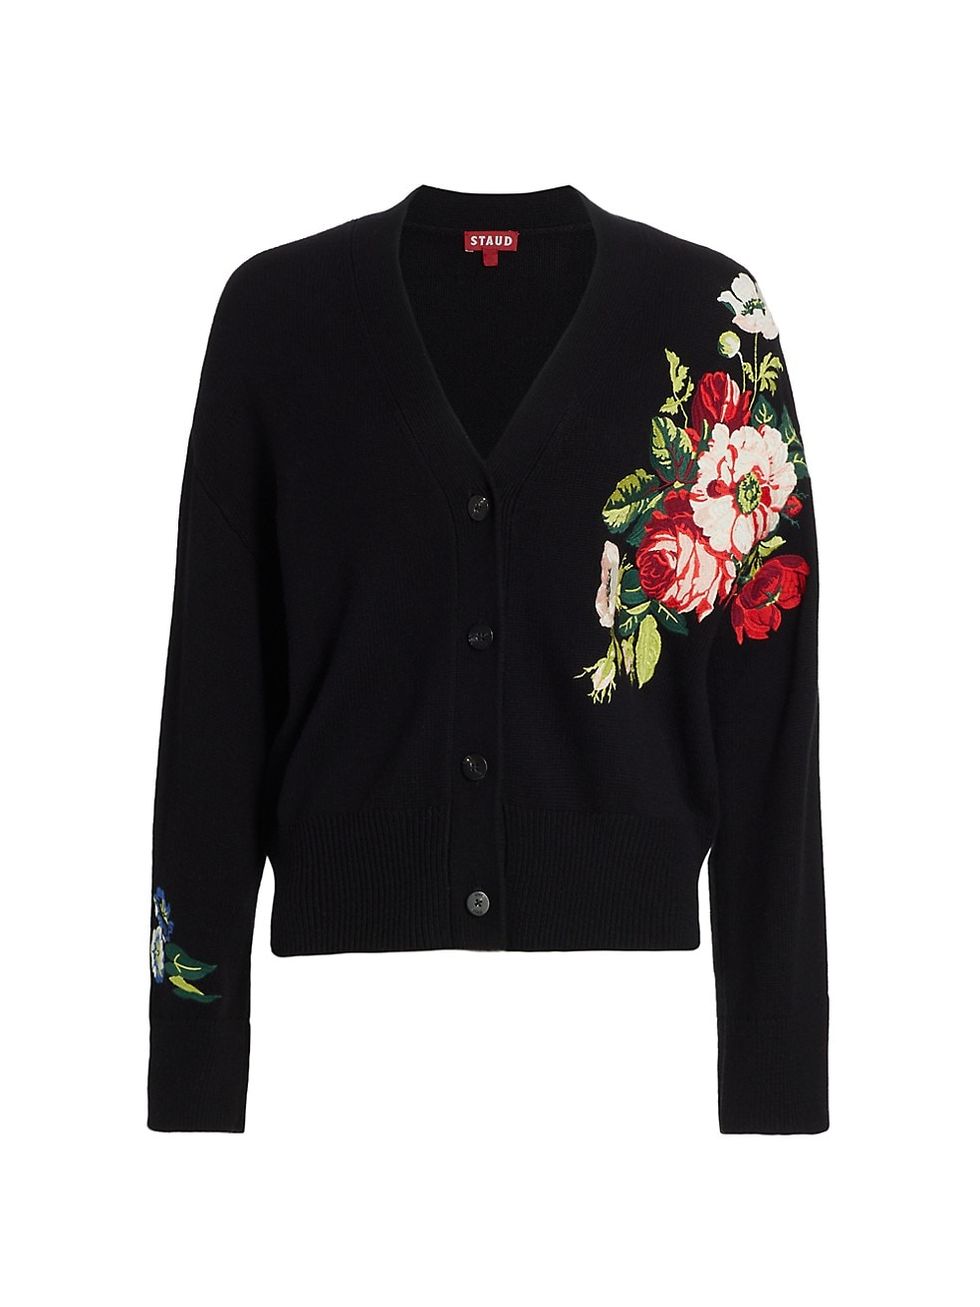 Rook Floral Embroidered Cardigan